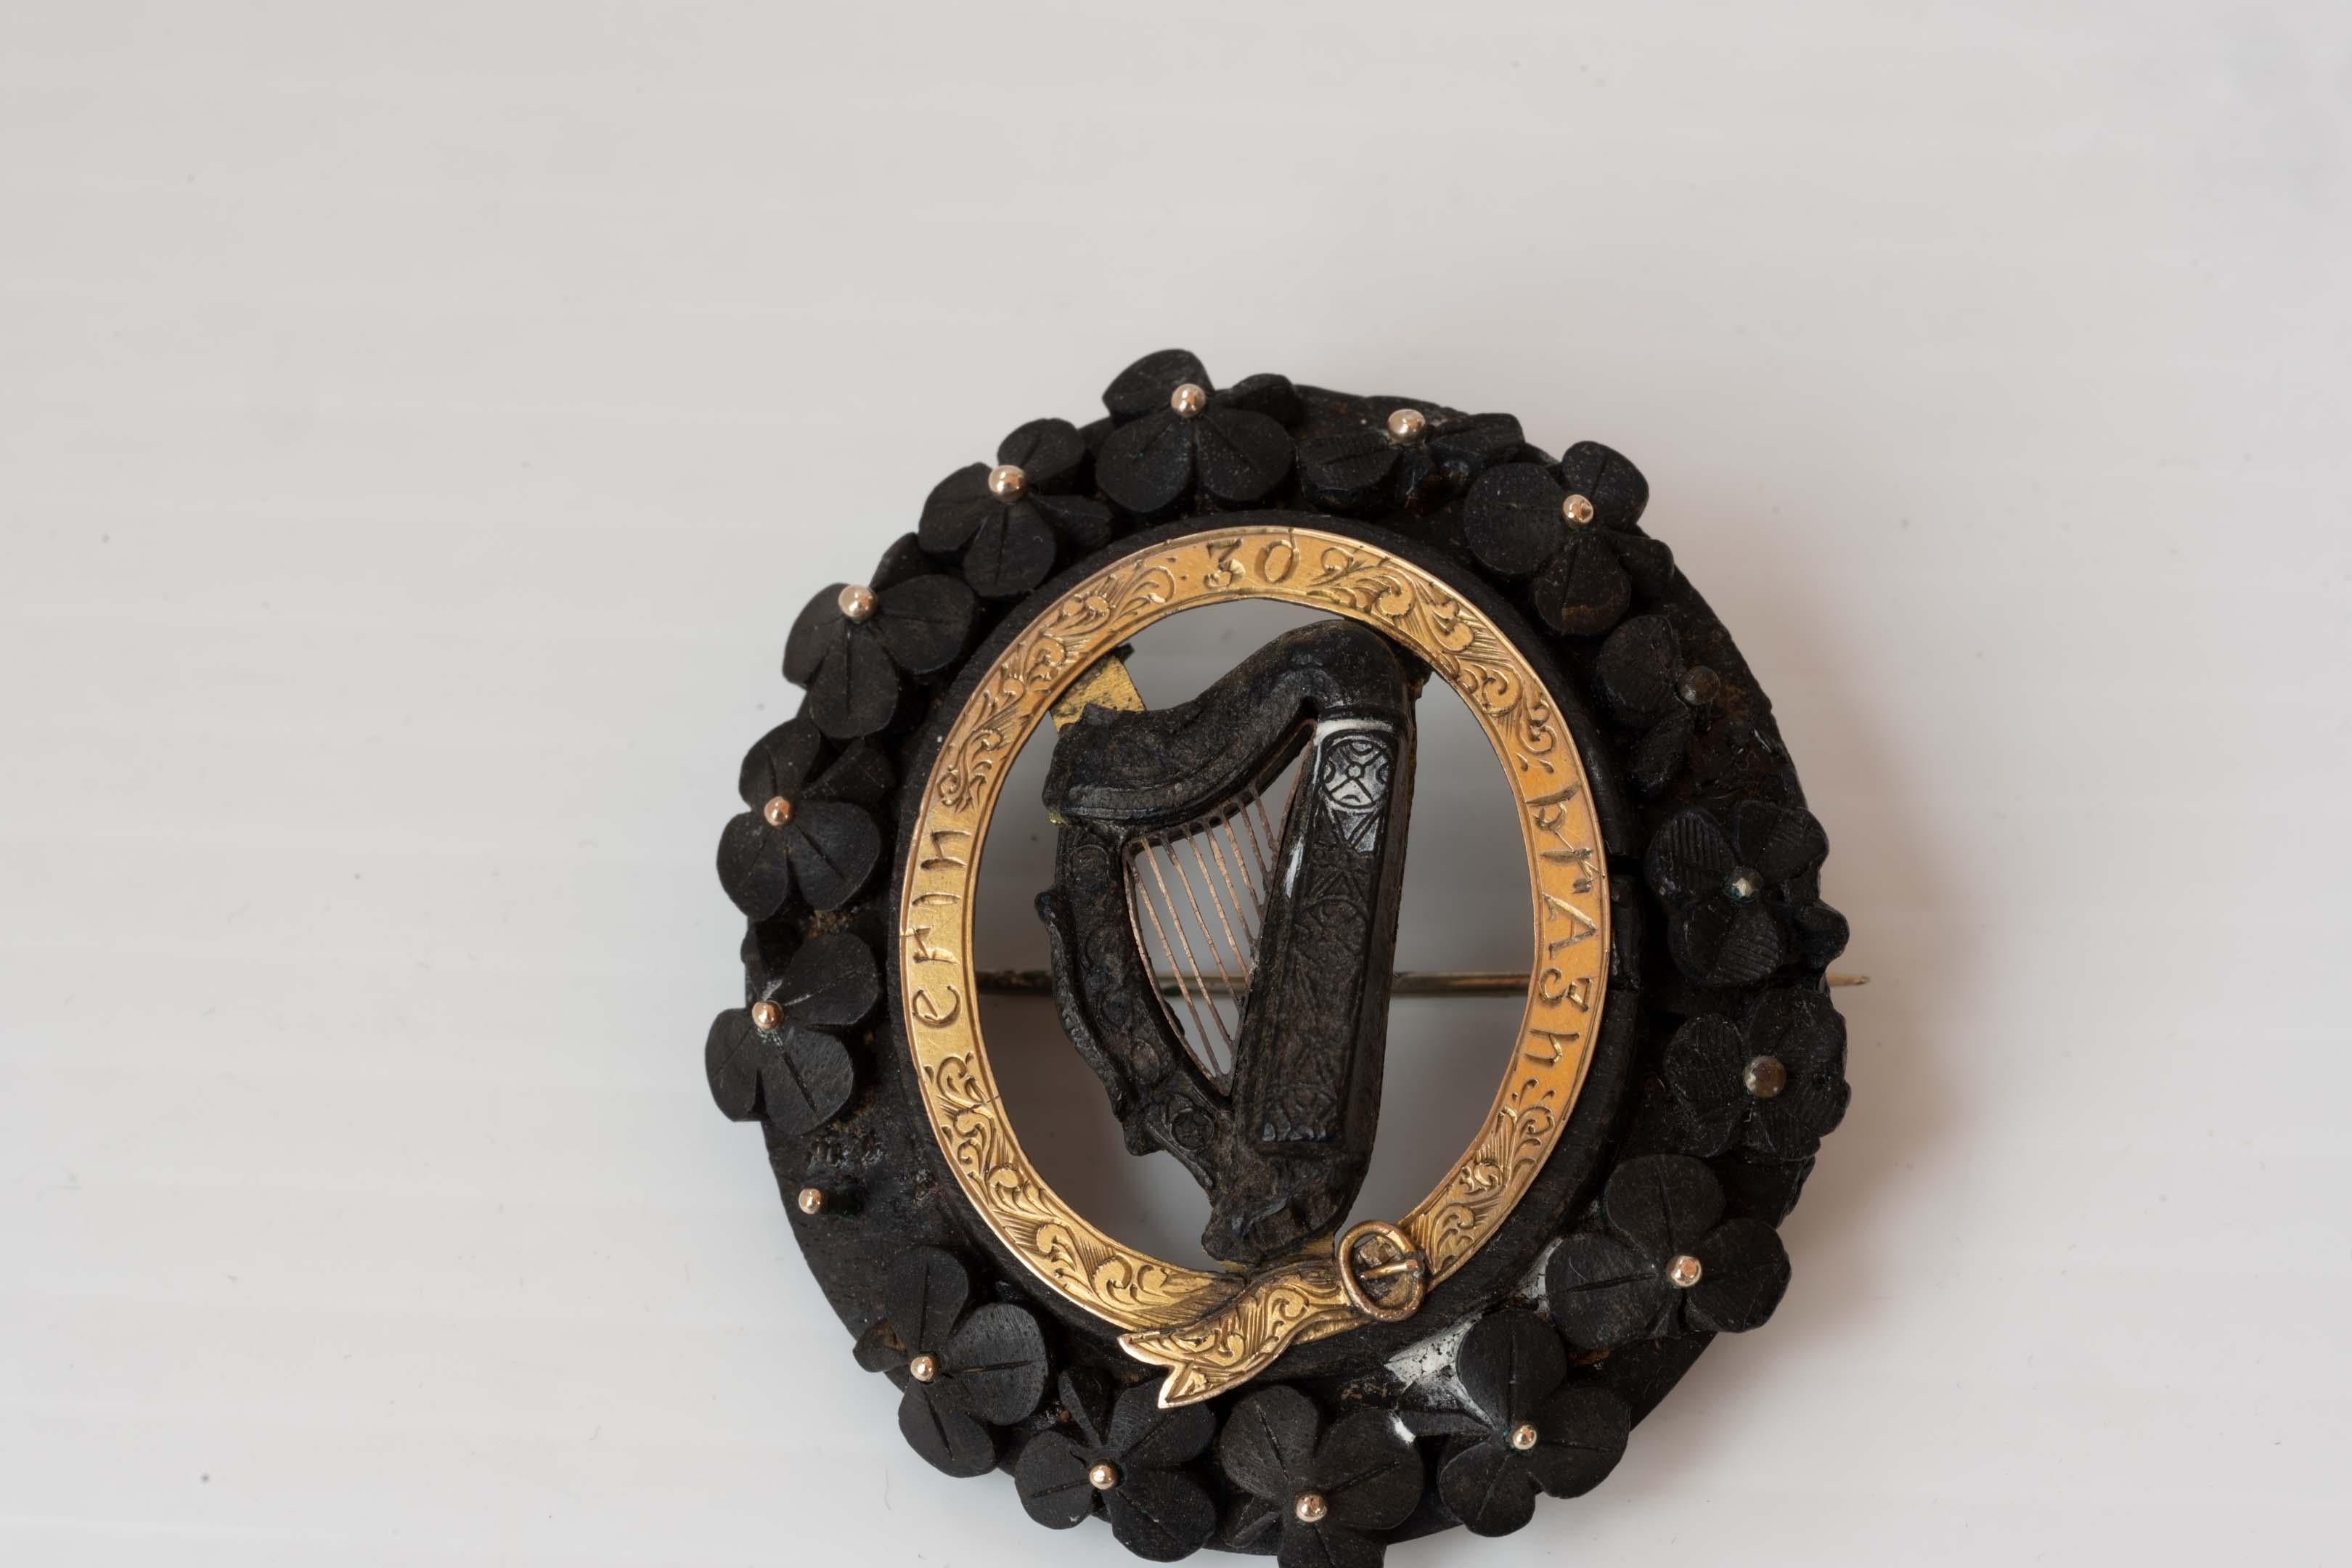 Antique Bog oak Irish harp pin brooch, Ireland Forever motto, Erin Go Bragh. With a carved design and clover leaves with gold-tone dots and rolled gold on metal. Central harp design, the brooch measures 2 1/4 inches x 2 inches (5.5 cm x 5 cm). The